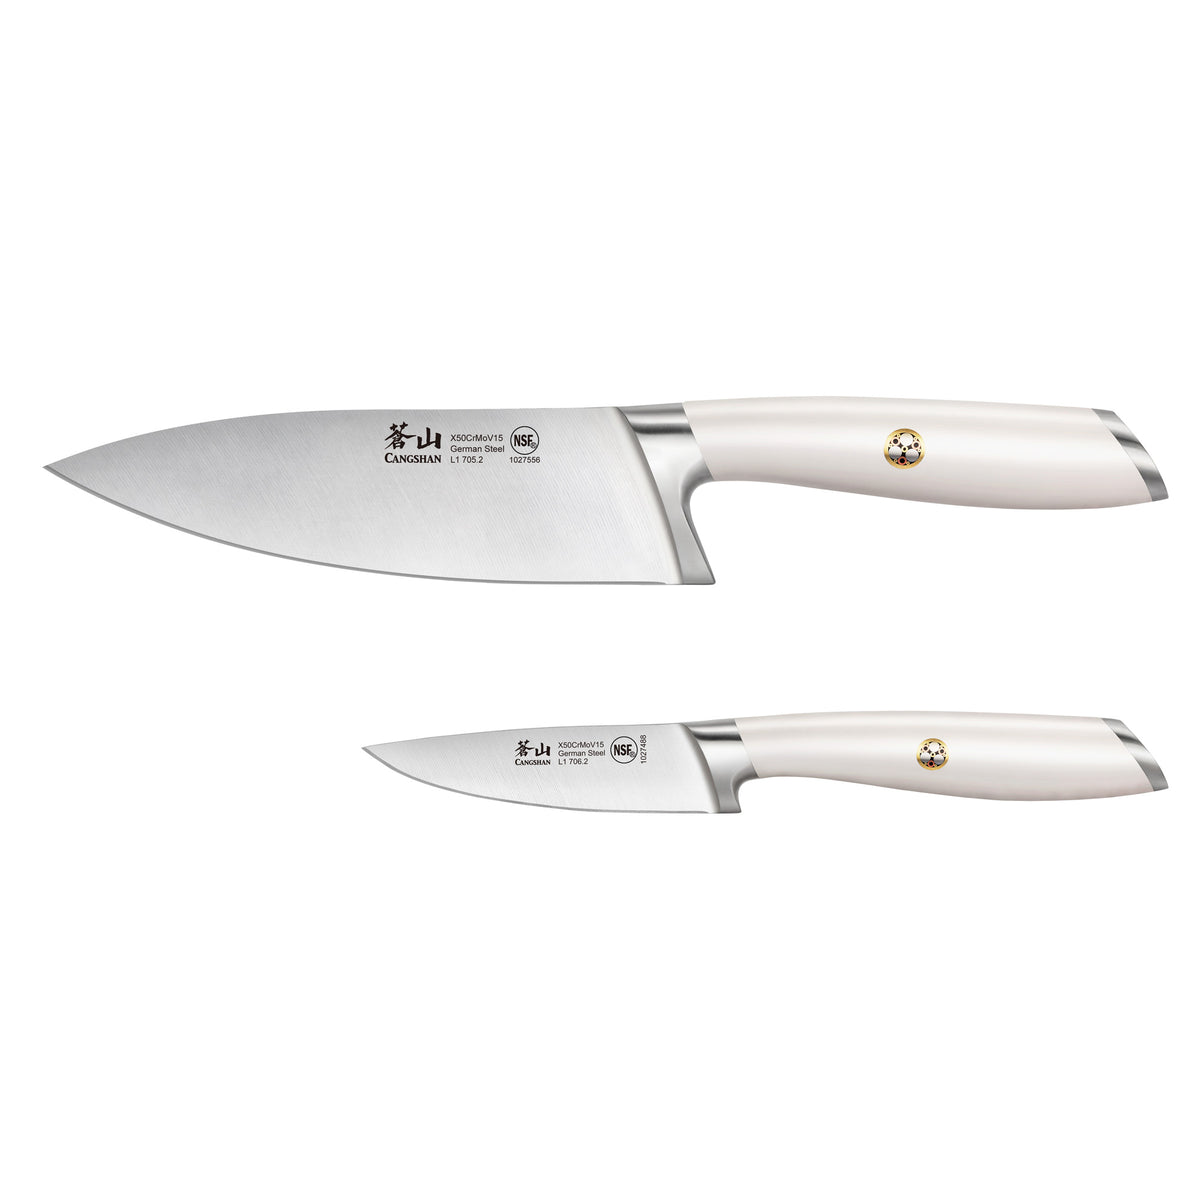 Limited Edition: 2 piece “United Series” Knife Set by Cangshan